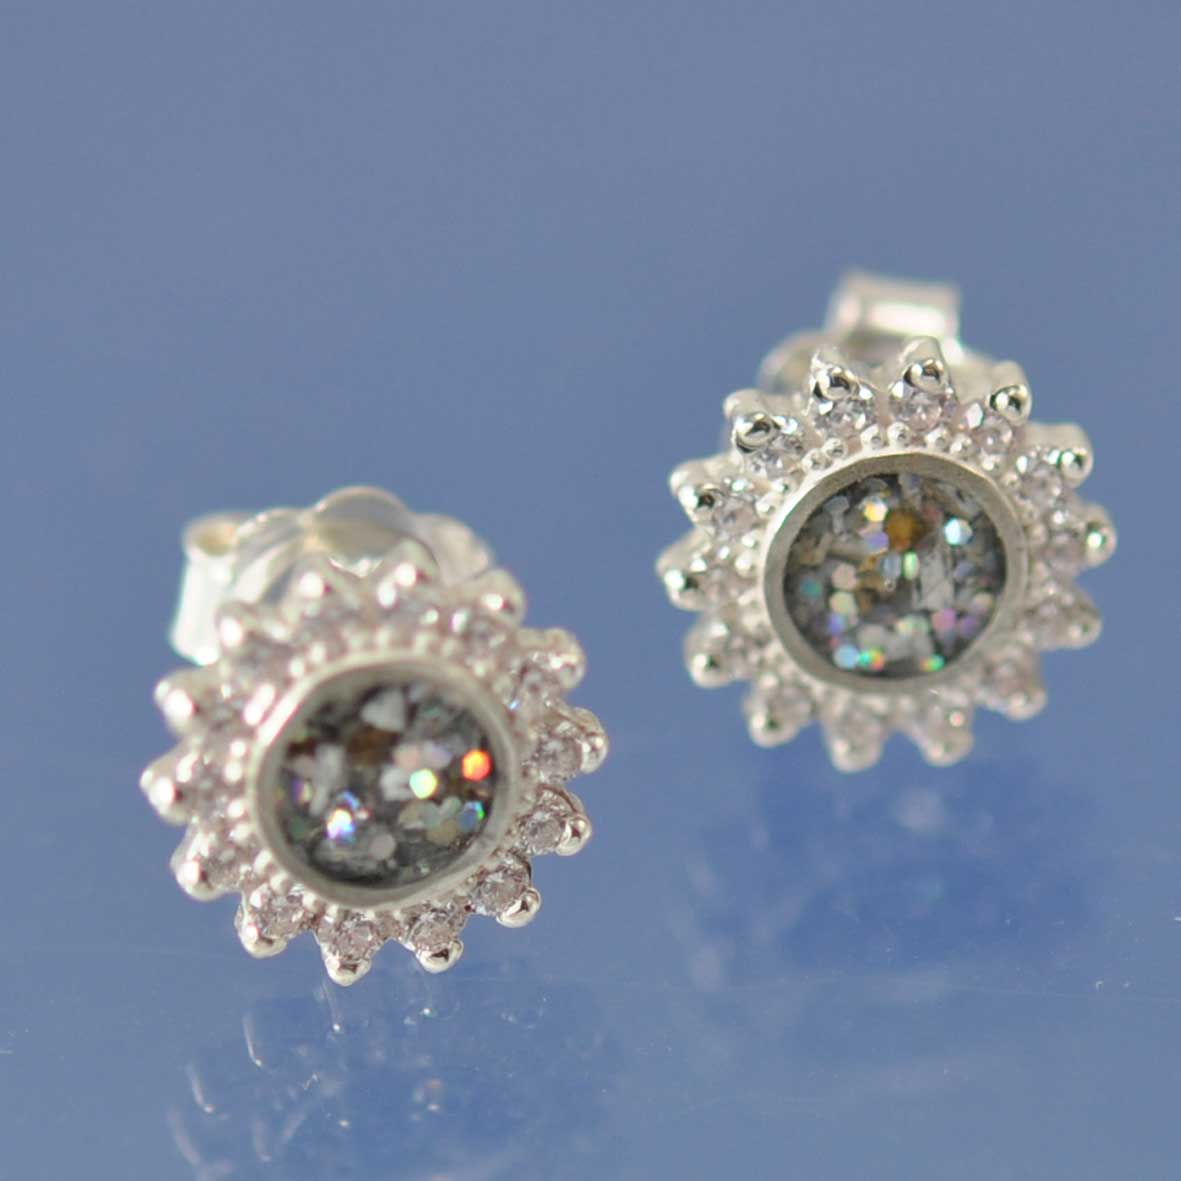 Sparkling Cremation Ash Earrings Earring by Chris Parry Jewellery